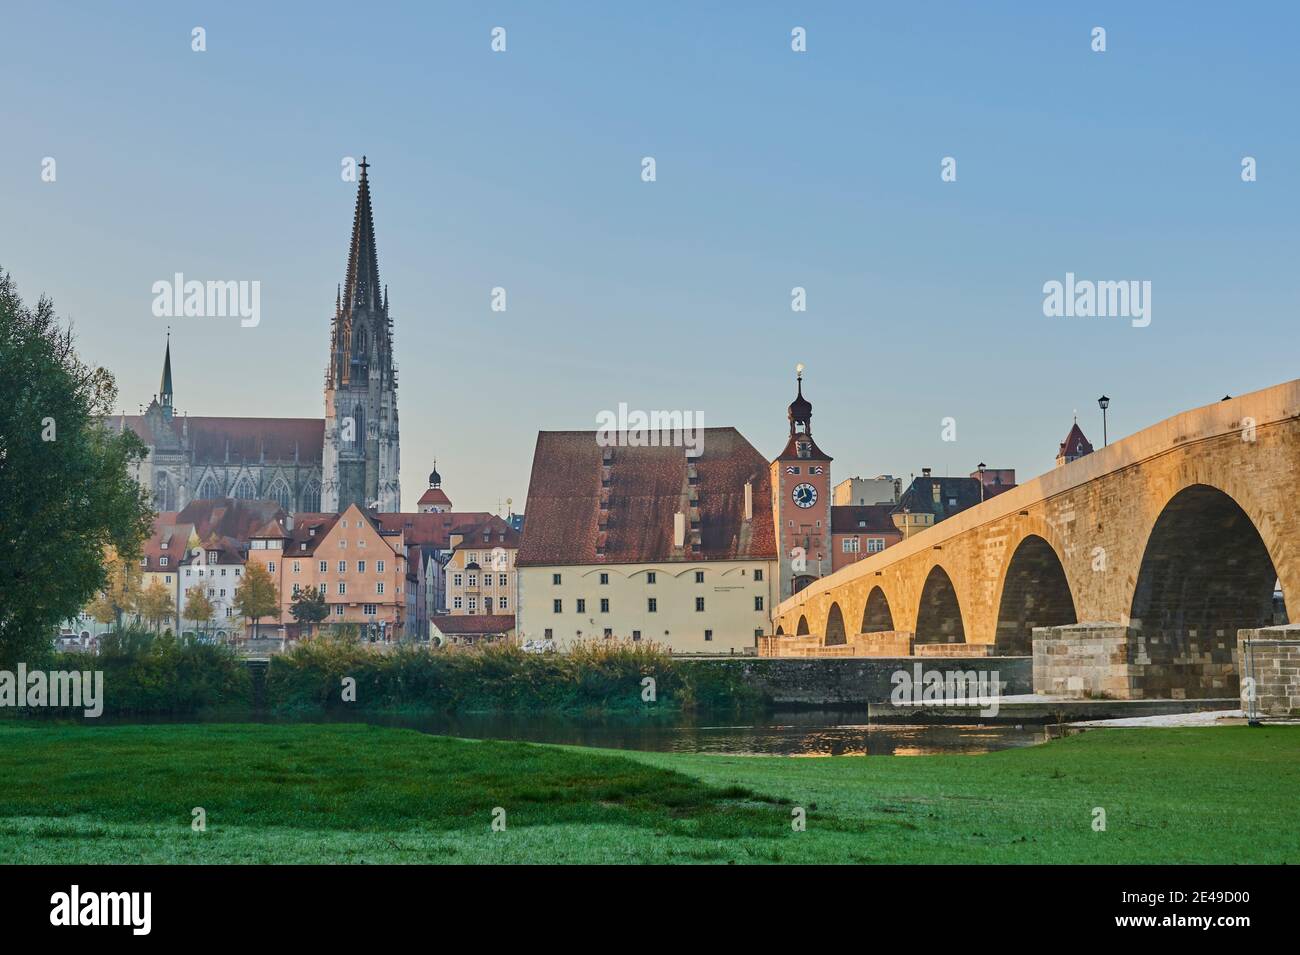 Stone bridge over Danube and old town with cathedral from Jahninsel, Regensburg, Upper Palatinate, Bavaria, Germany Stock Photo